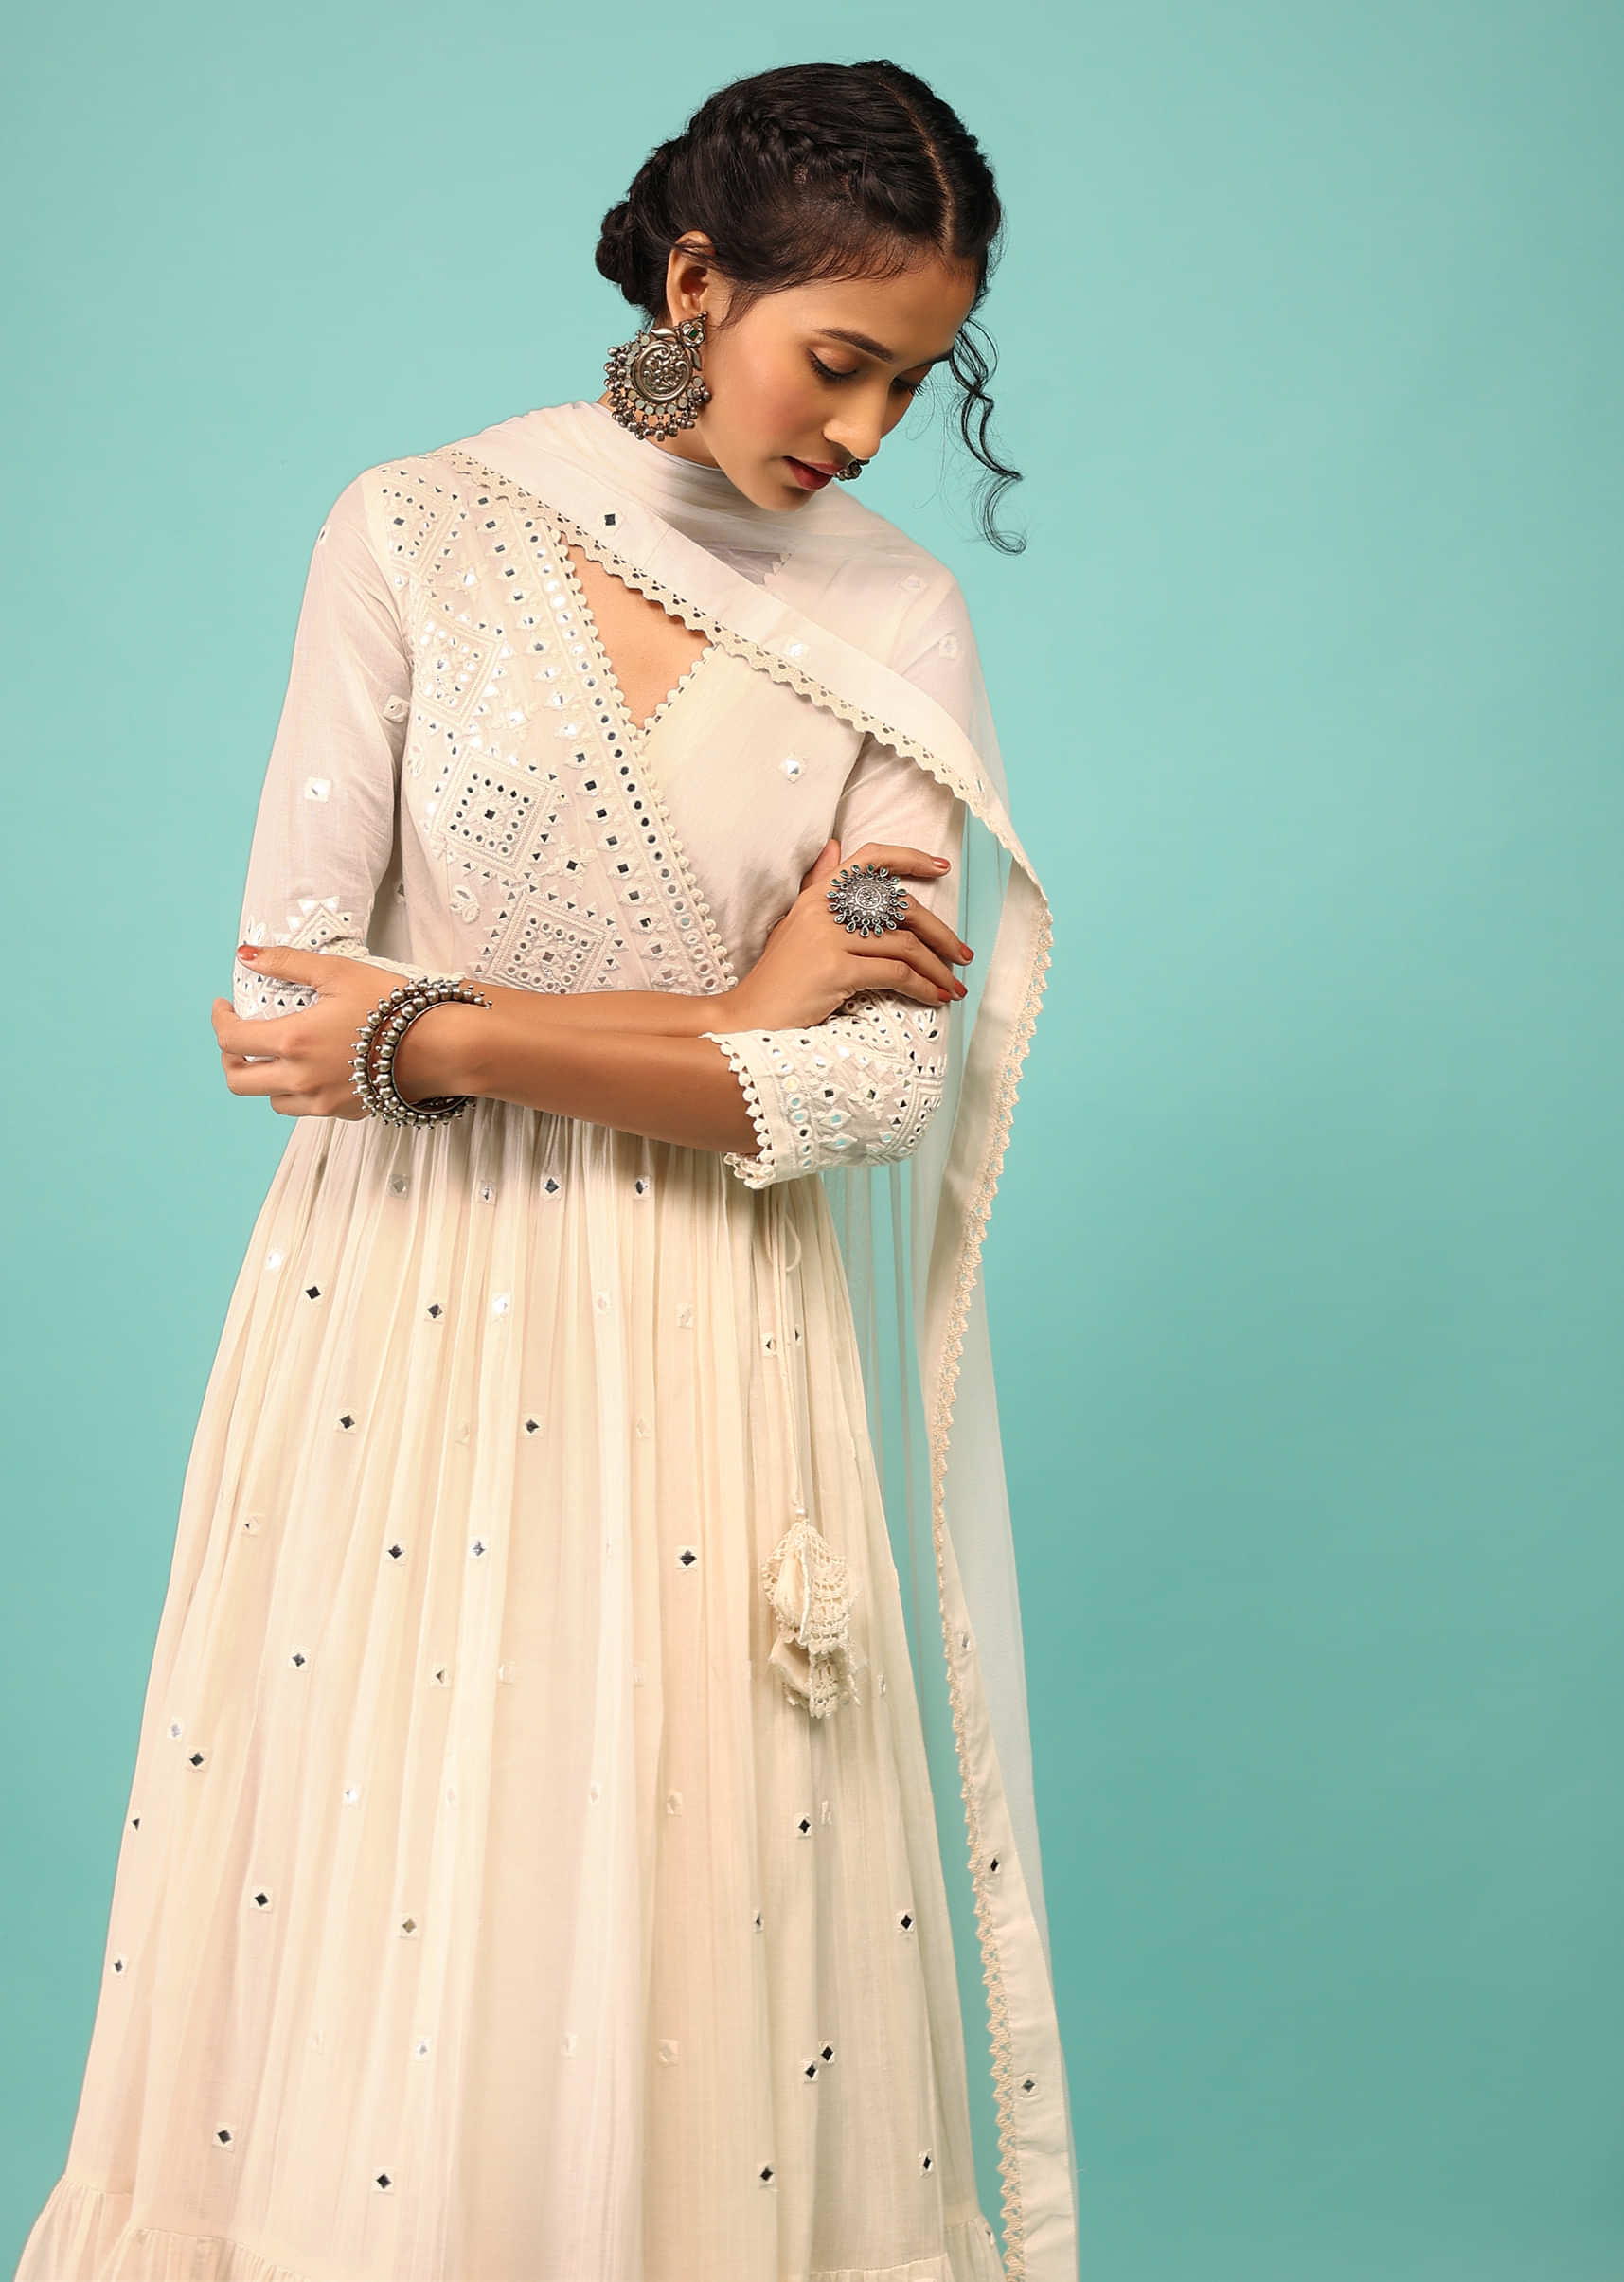 Pearl White Anarkali Kurta In Lucknowi Embroidery With Angrakha Pattern & Surplice Neckline